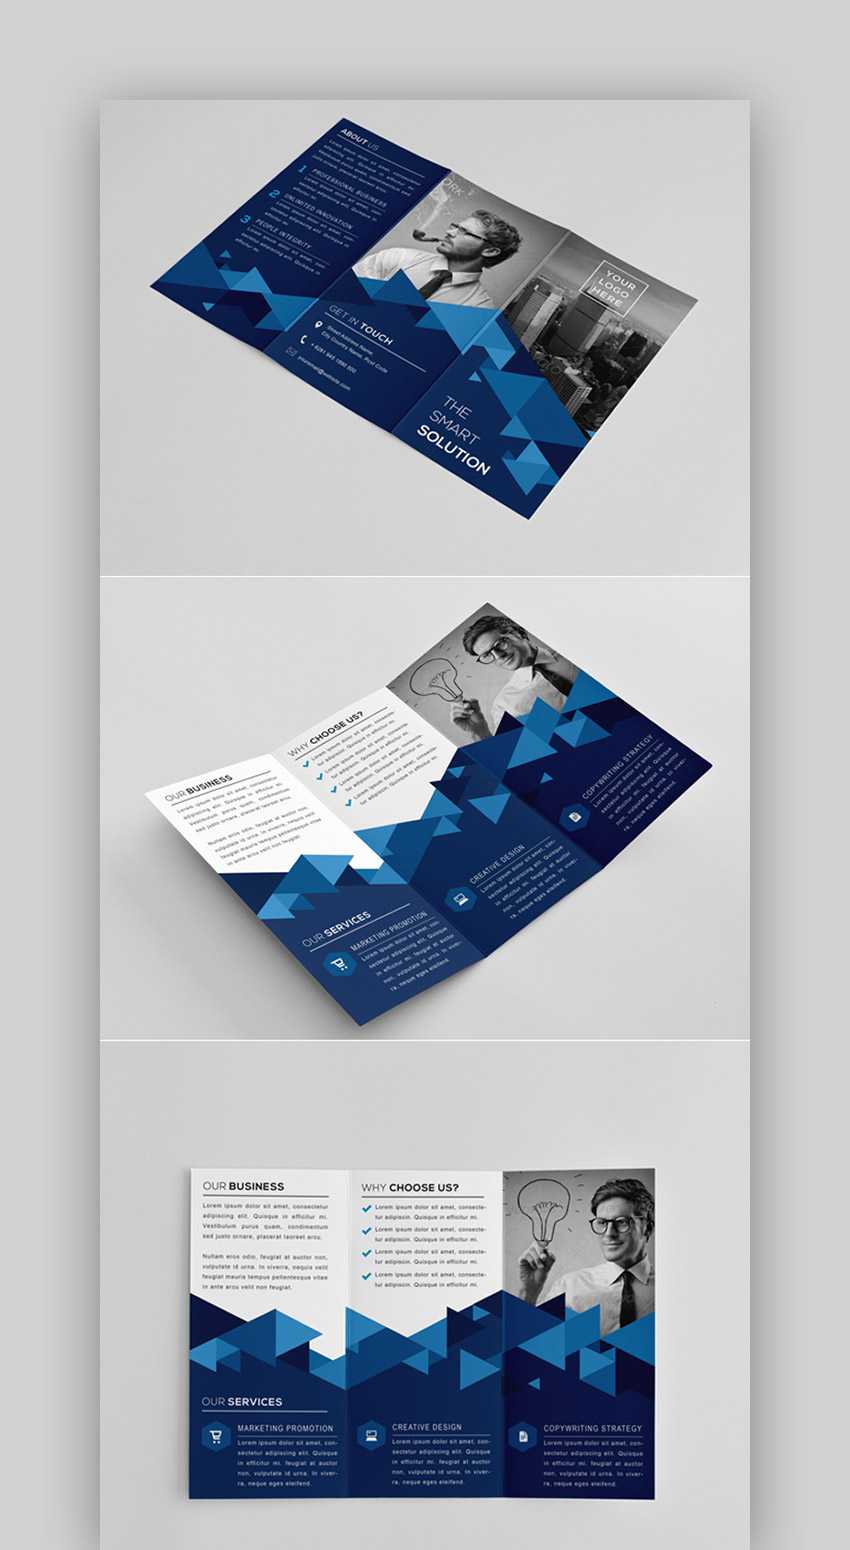 35 Best Indesign Brochure Templates – Creative Business With Regard To Tri Fold Brochure Template Indesign Free Download